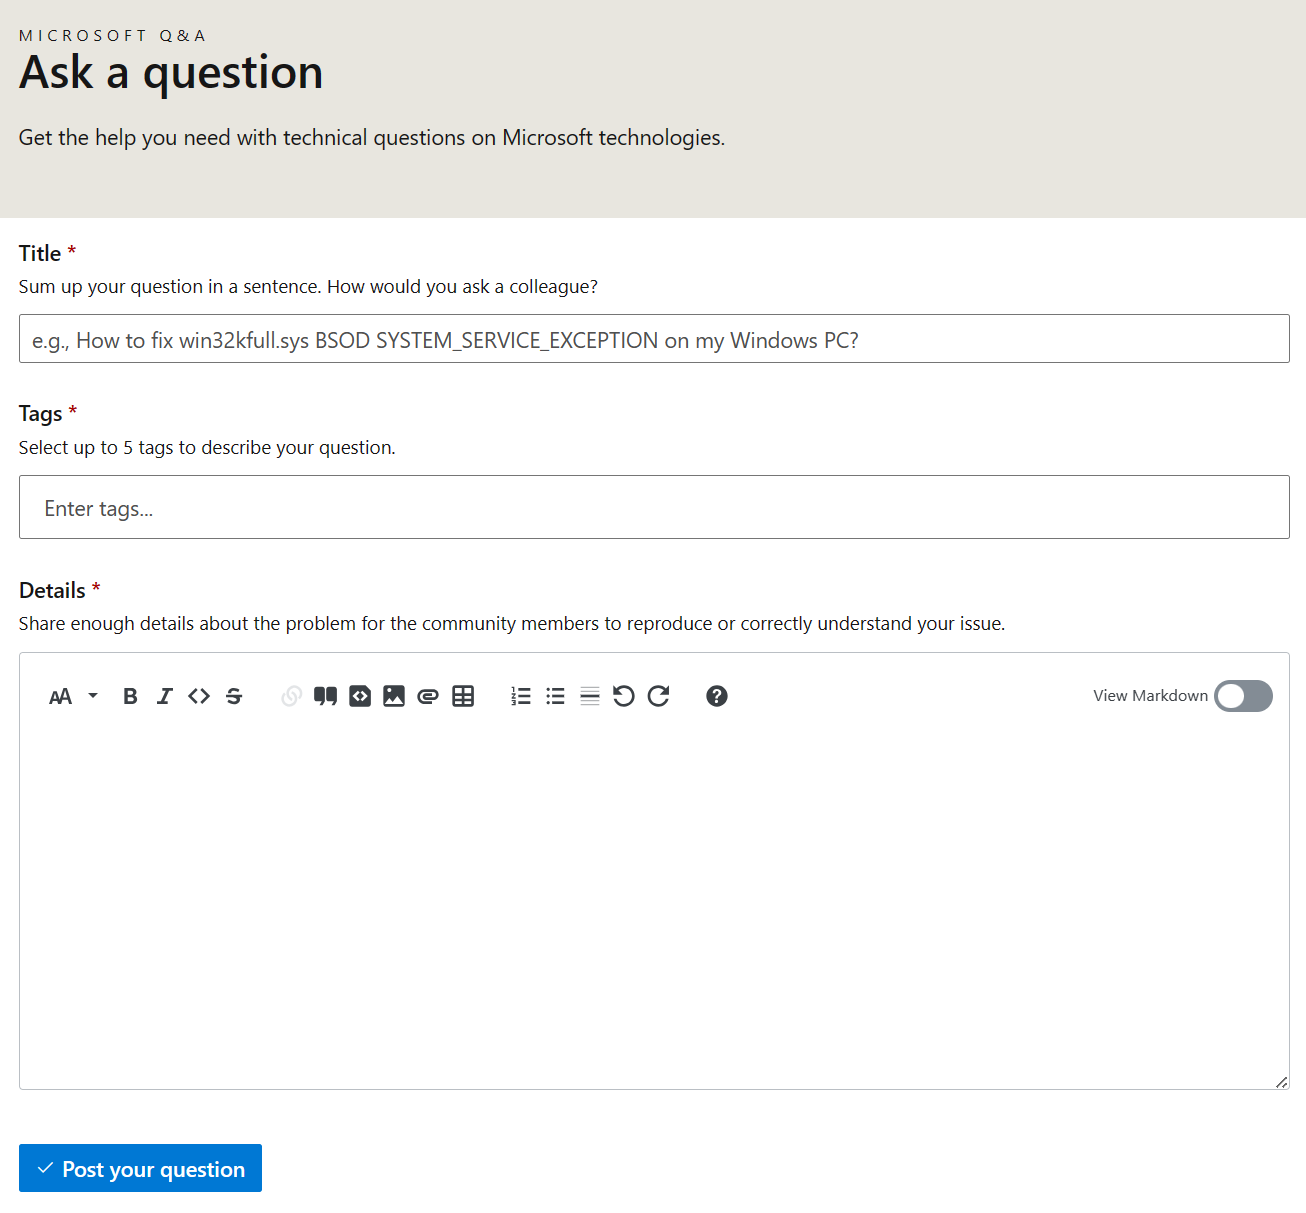 Screenshot of a blank form to post a question on Microsoft Q&A.